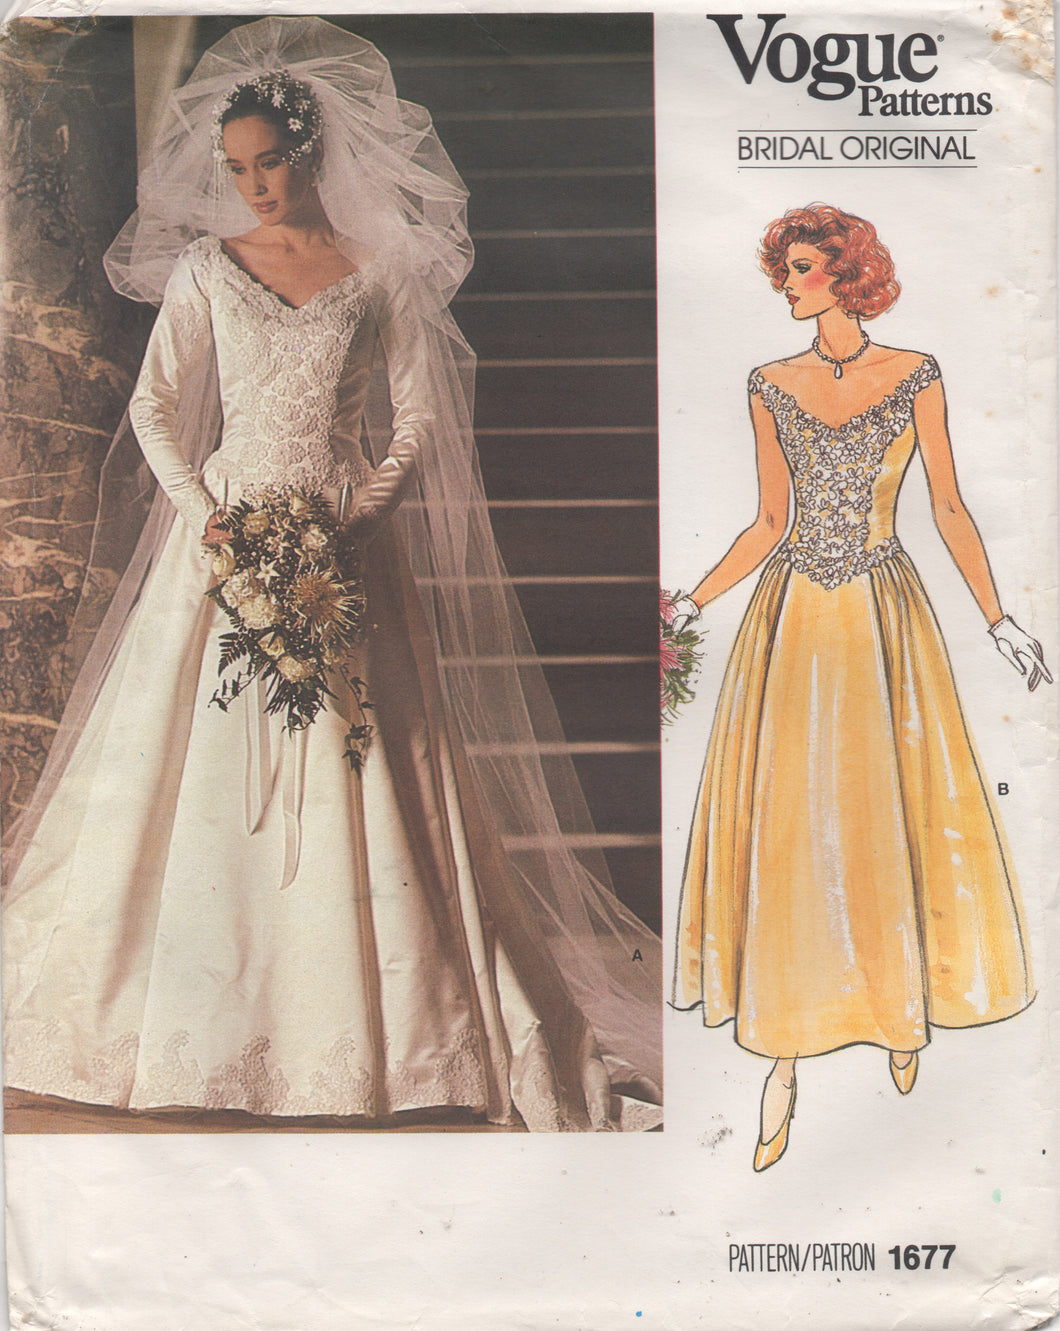 1980's Vogue Bridal Original Gown with Fitted Bodice, Side gathered skirt and strap or long sleeves- Bust 32.5